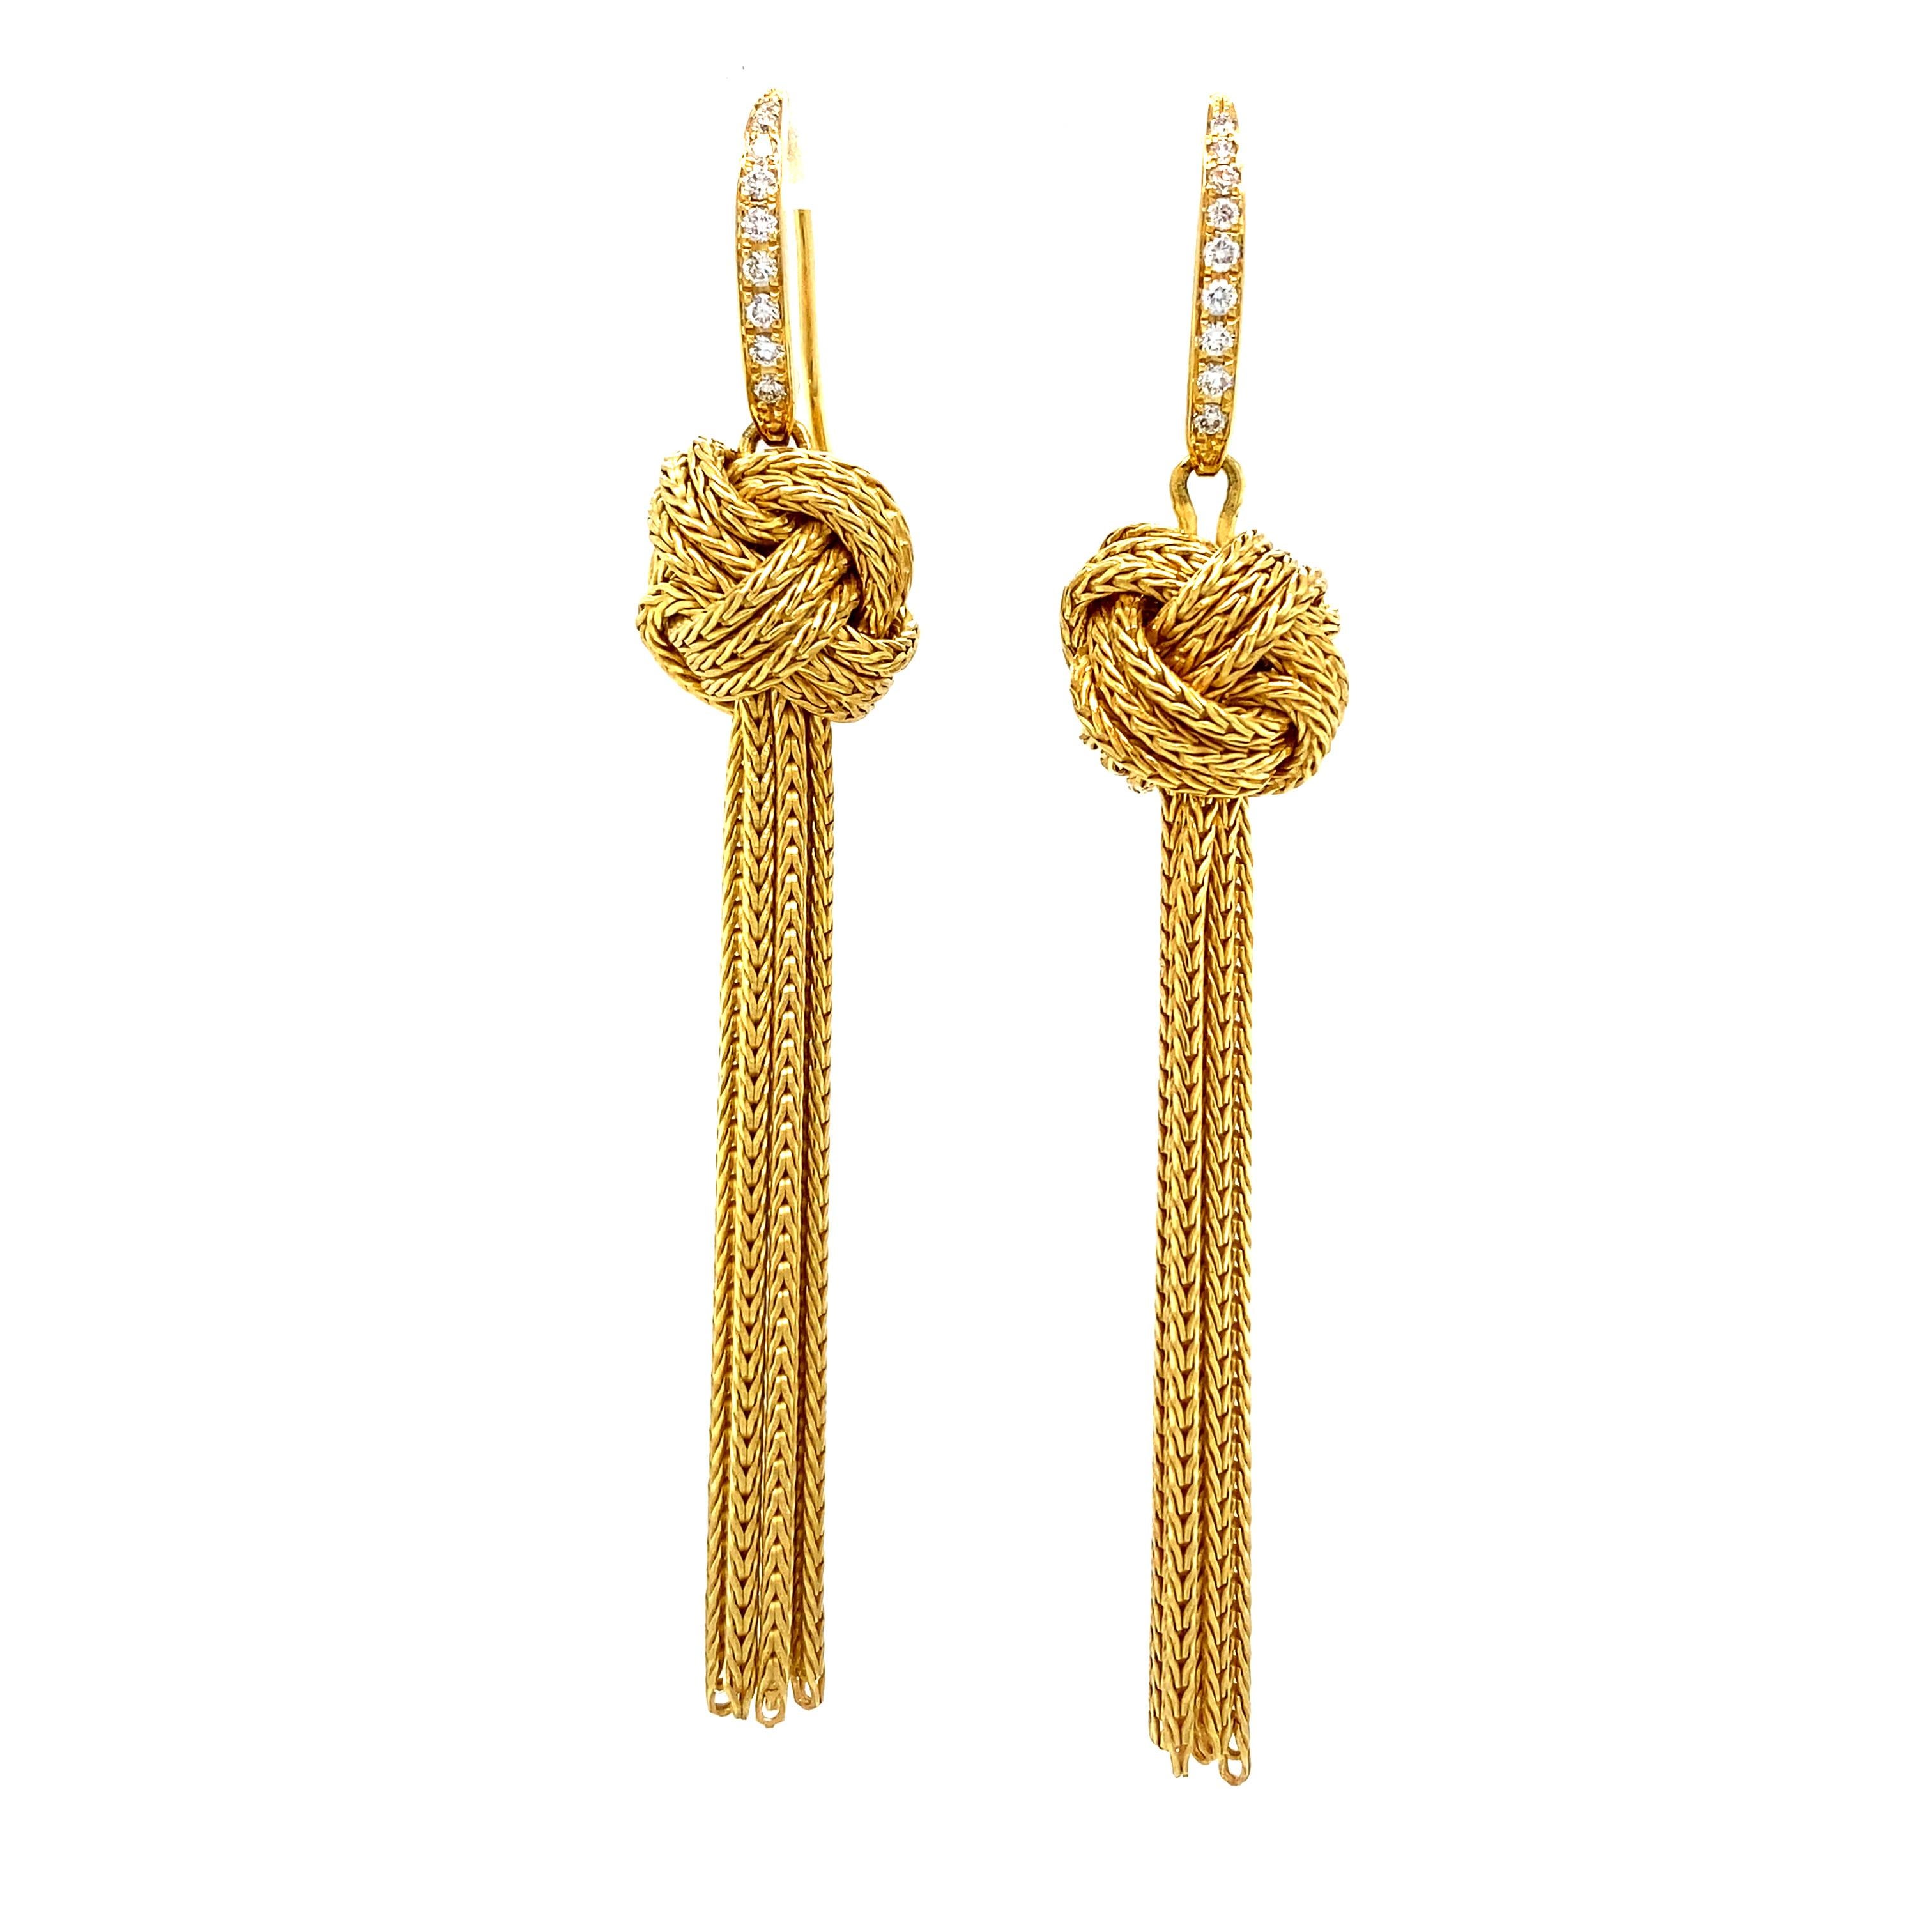 Victor Mayer knot earrings 18k yellow gold, Casino collection, 18 diamonds, total 0.15 ct, G VS, brilliant cut,
measurements app. 86.0 mm x 12.5 mm (Ø knot)

About the creator Victor Mayer
Victor Mayer is internationally renowned for elegant